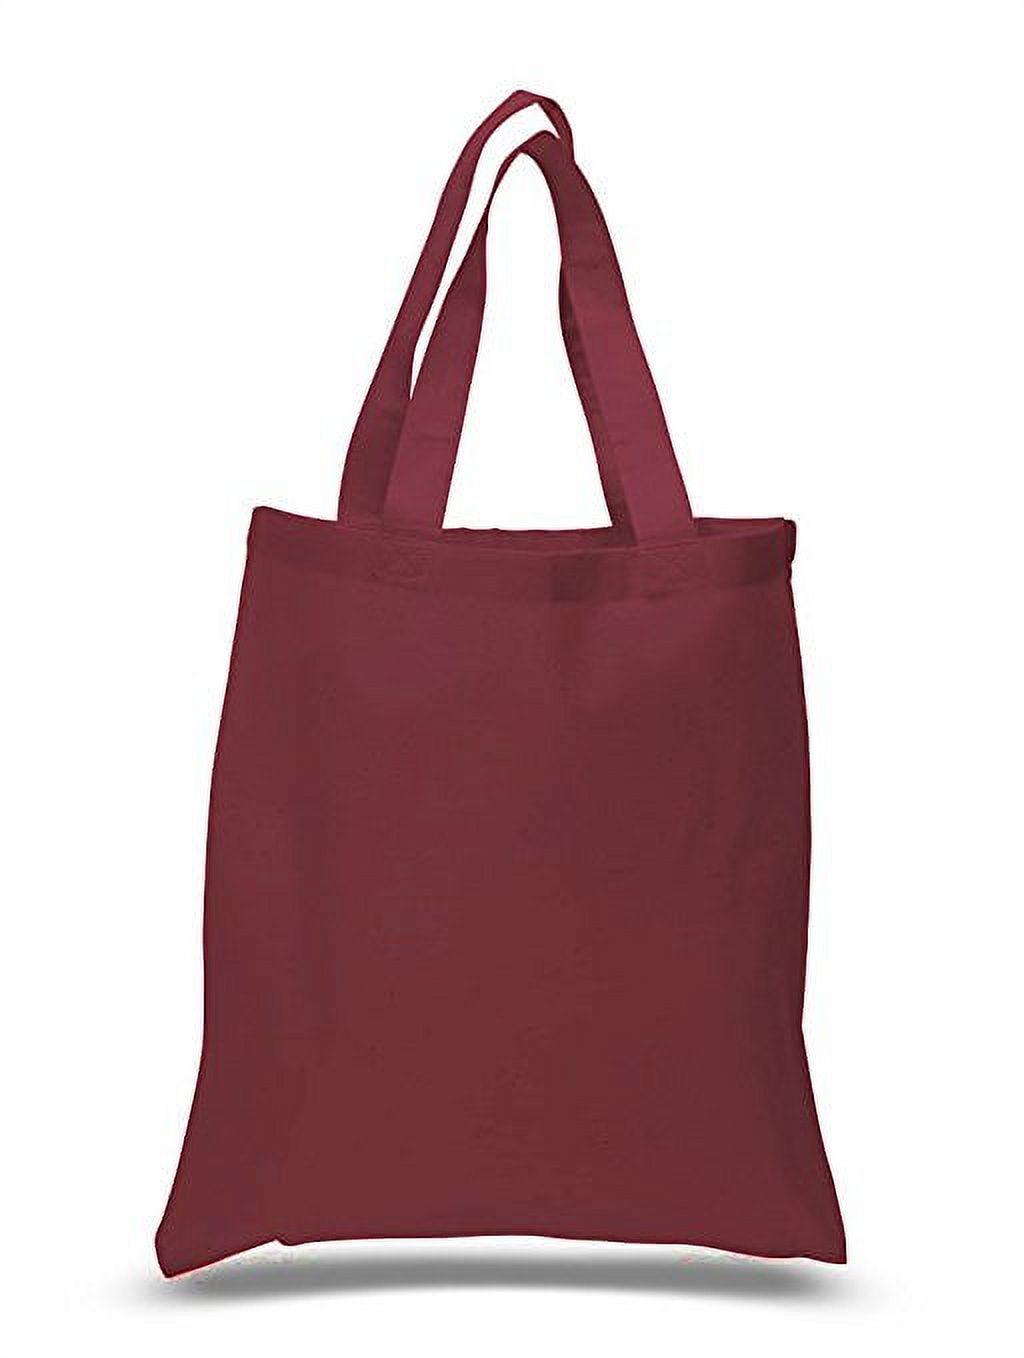 12pcs 100% Cotton Canvas Reusable Grocery Shopping Tote Bags in Bulk - 15x16 (Maroon) - image 1 of 1